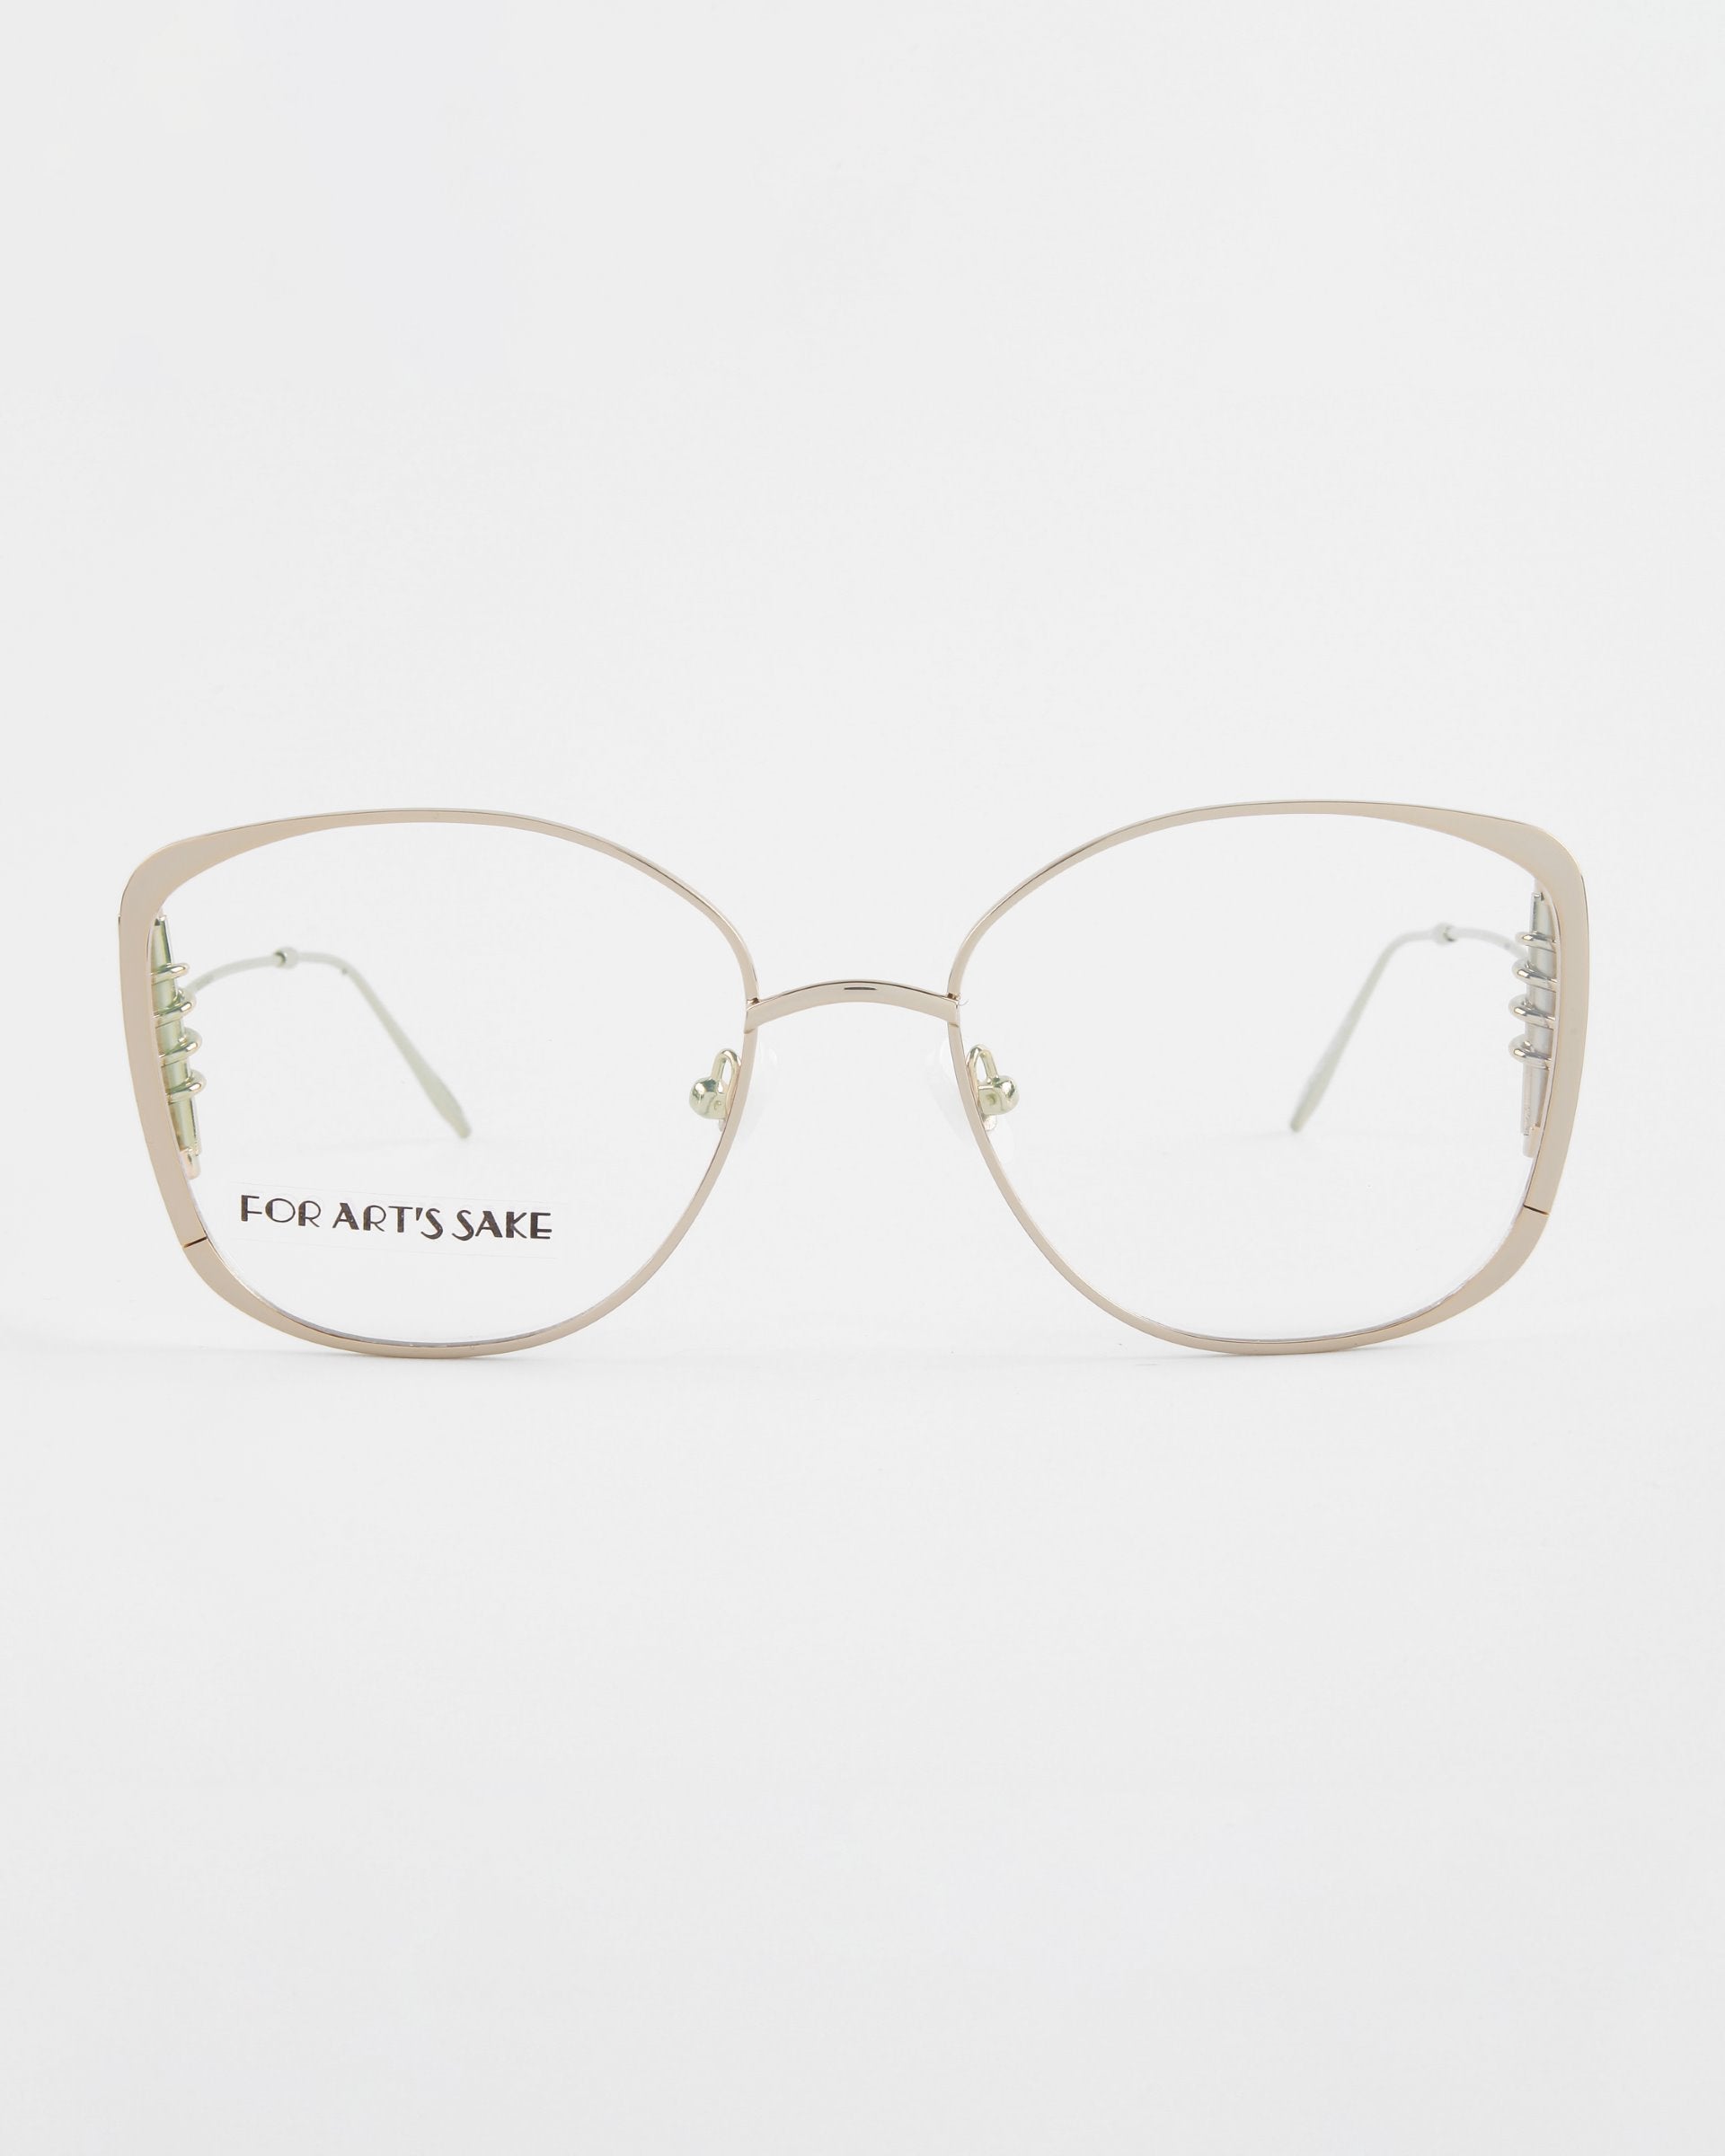 A pair of gold-rimmed eyeglasses with large, square-shaped lenses. The glasses have thin, lightweight frames with 18-karat gold plating and clear lenses. The product name &quot;Jupiter&quot; and the brand name &quot;For Art&#39;s Sake®&quot; are visible on the left lens. The background is white.